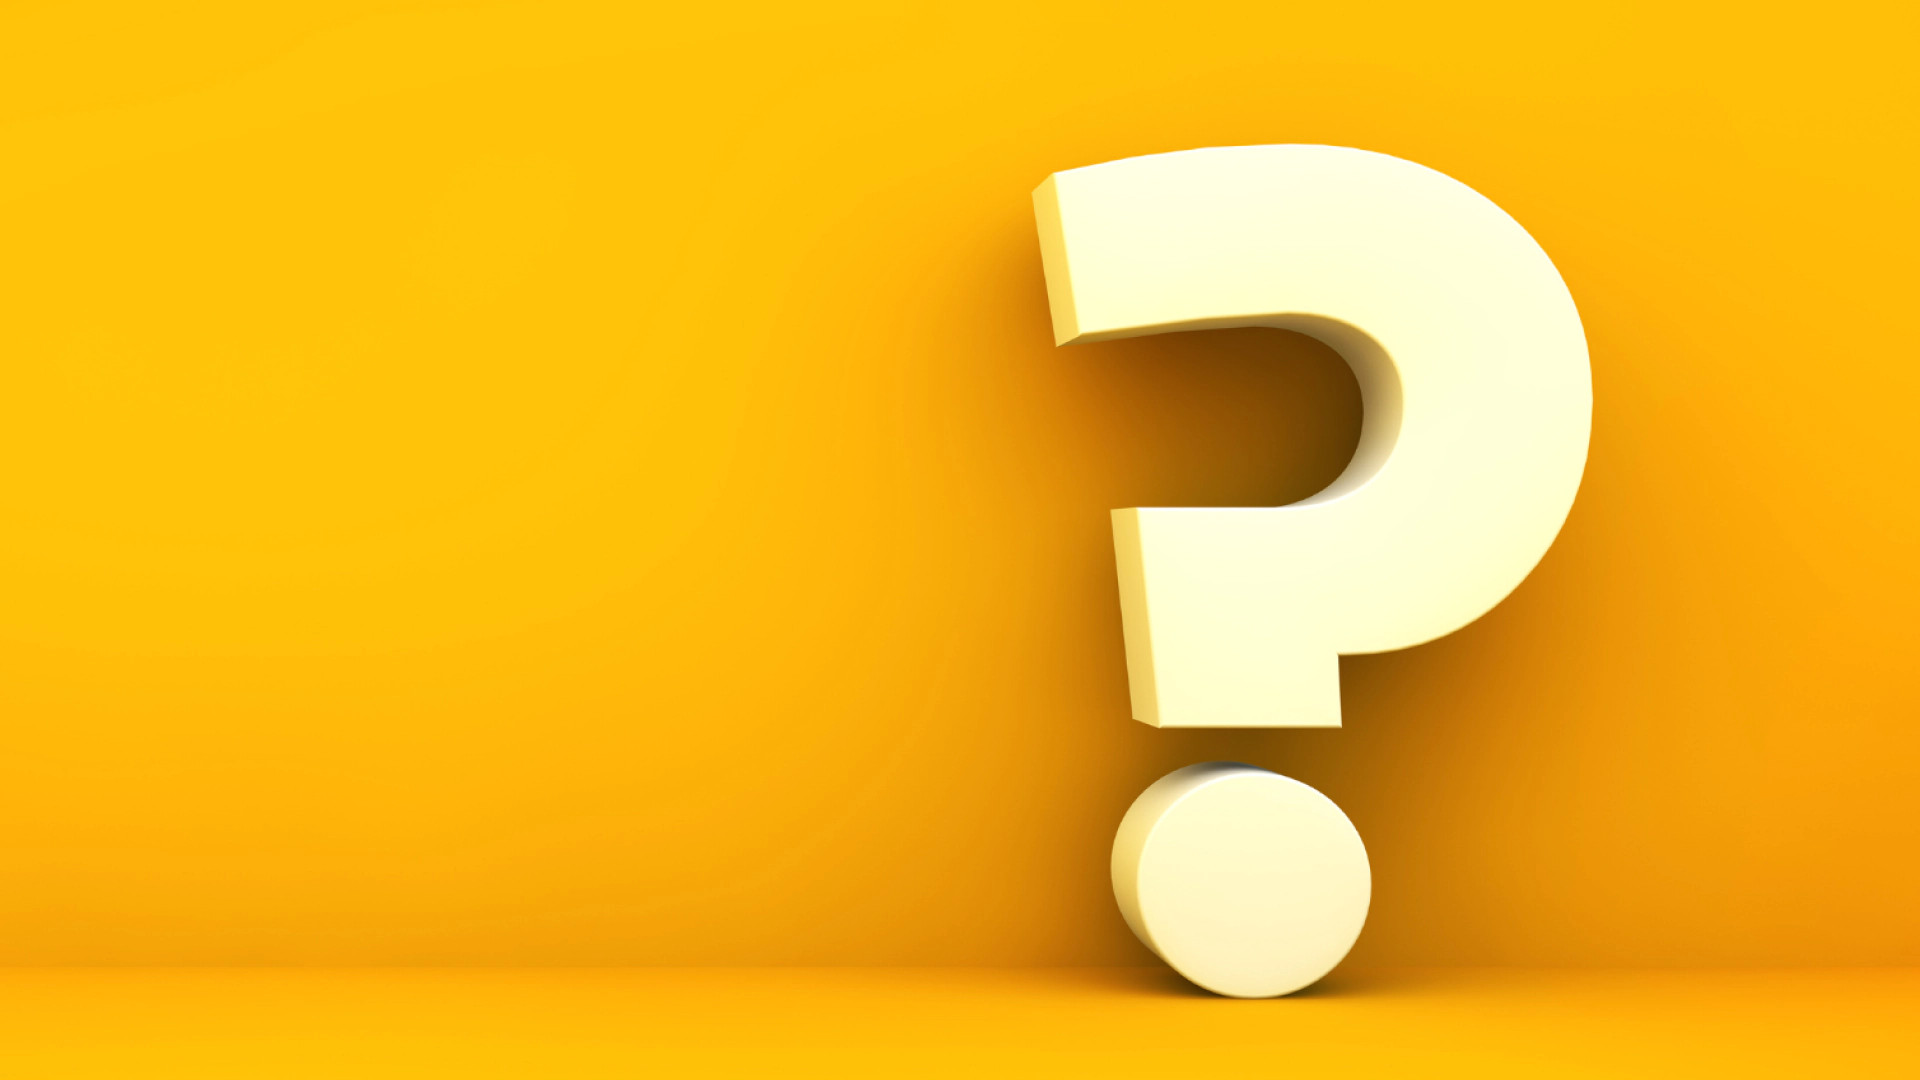 question mark on a yellow background